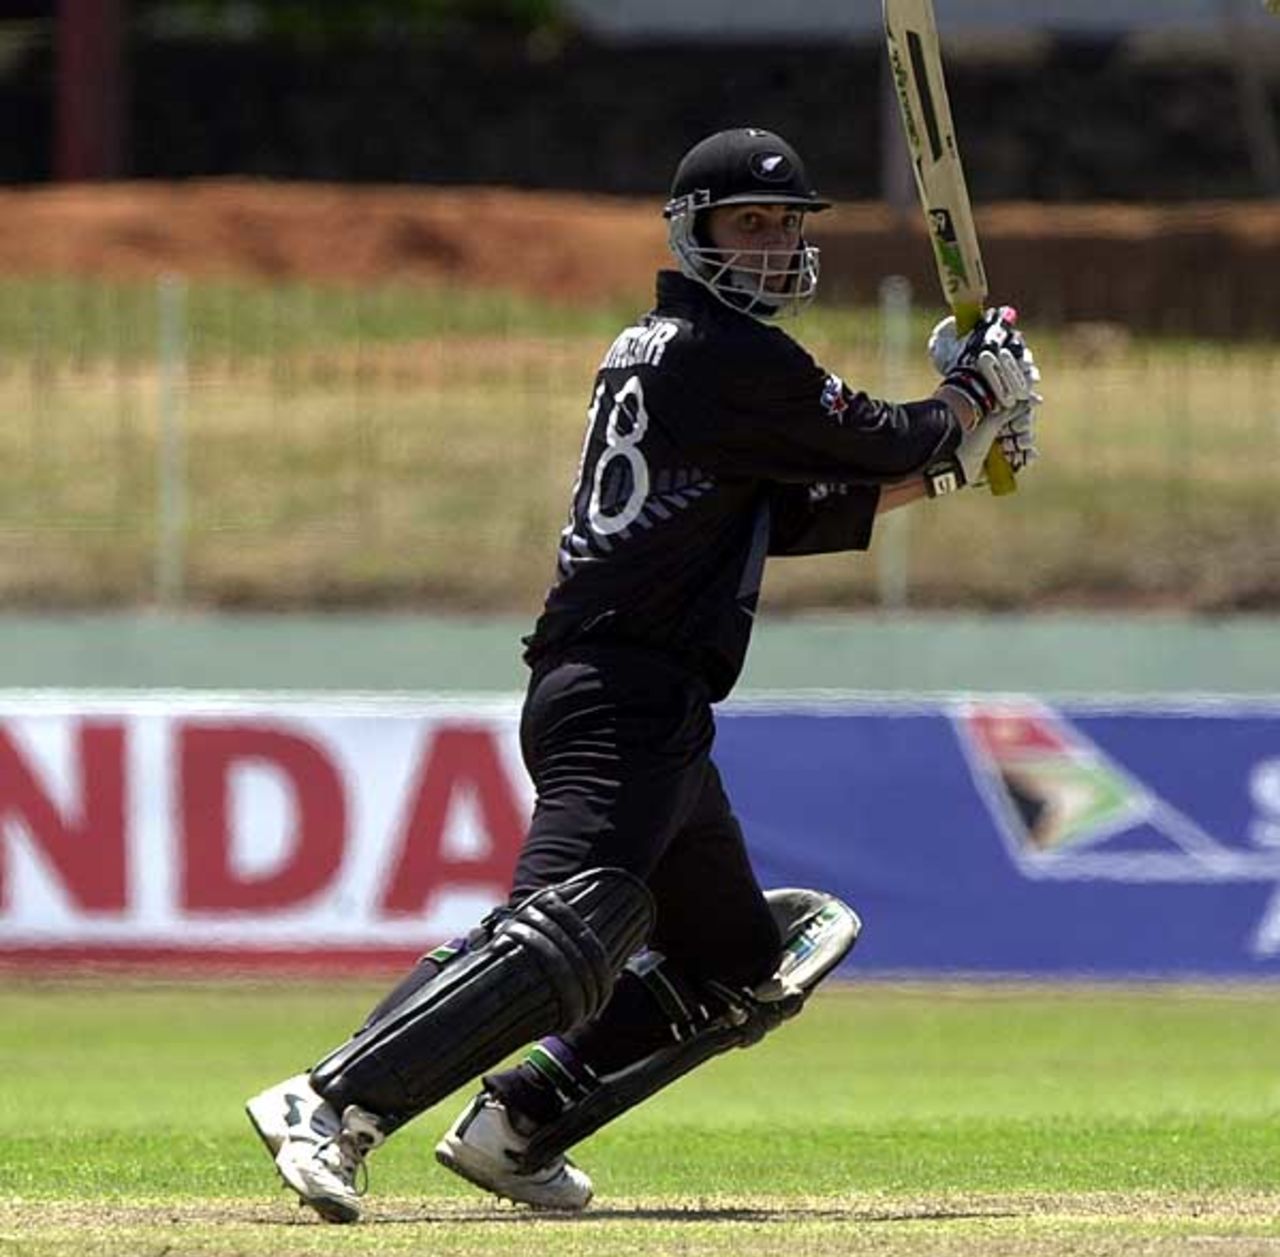 ICC Champions Trophy, Bangladesh v New Zealand, 23rd September 2002, Colombo (SSC)